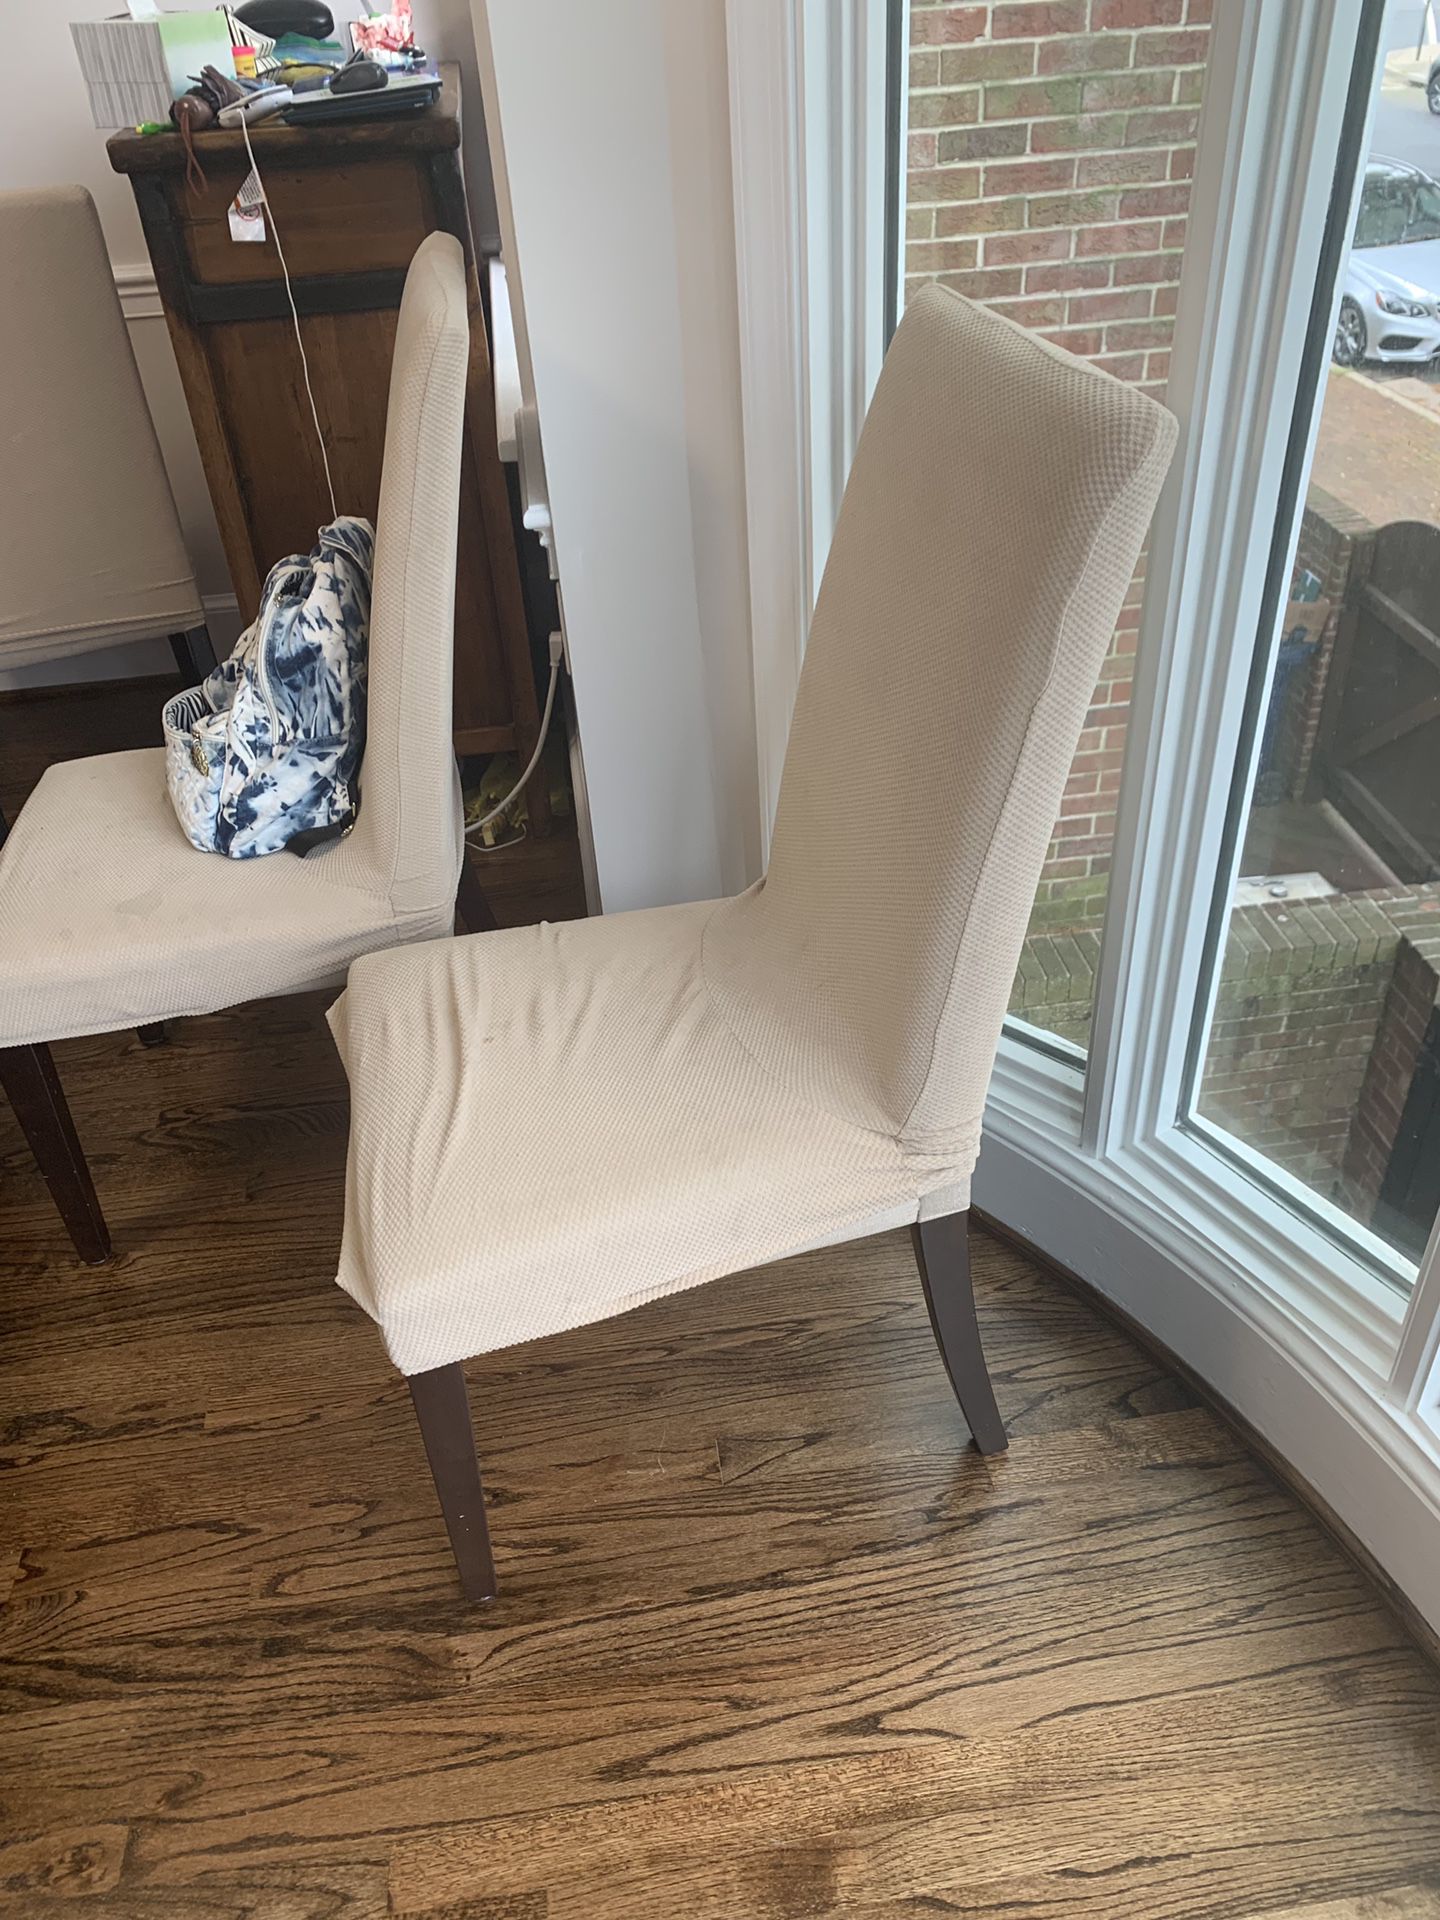 4 Dining Chairs for Free in Old Town